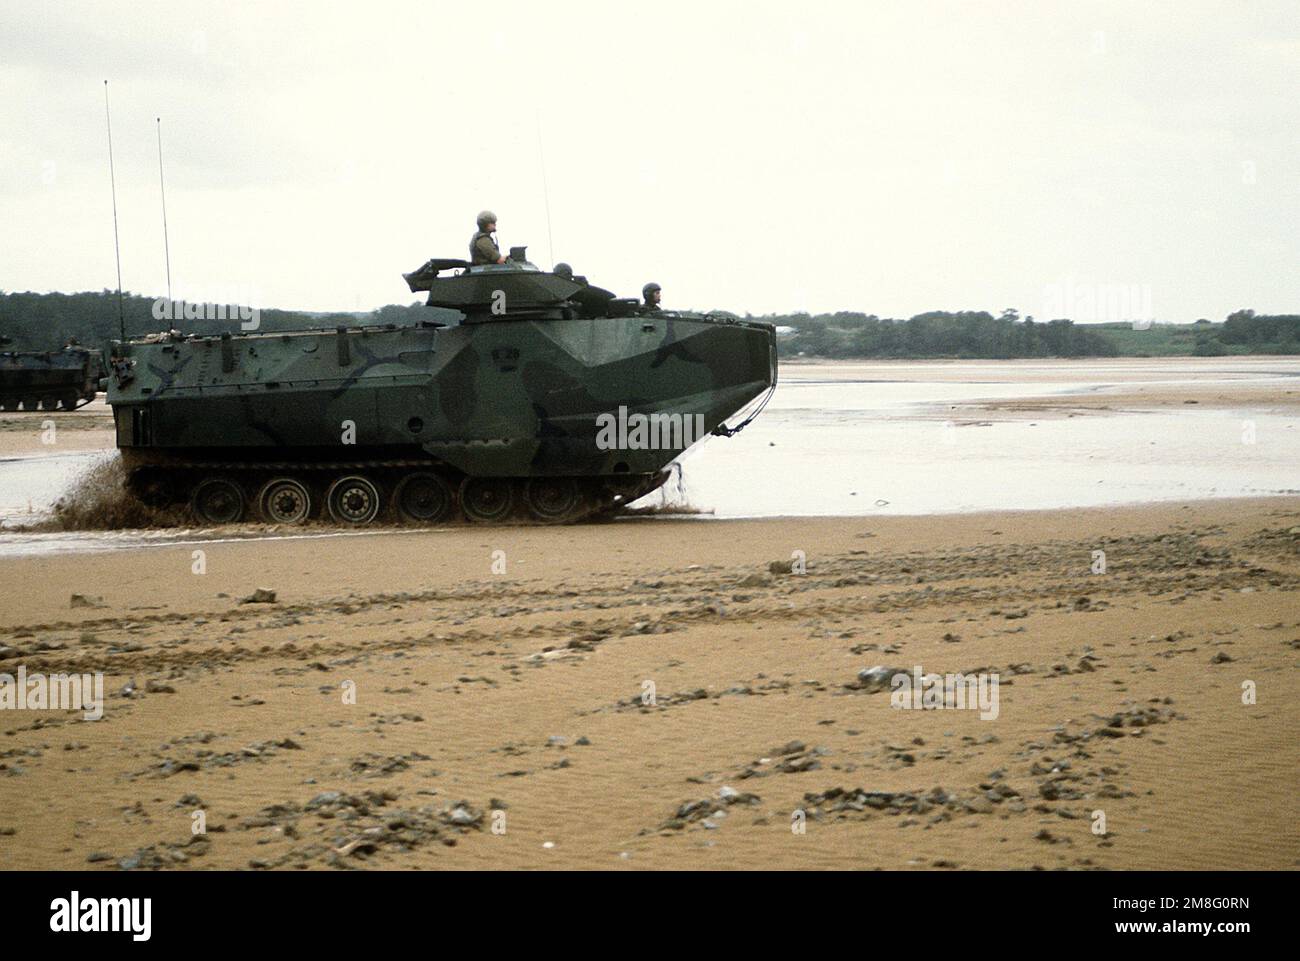 Marine Corps Base, Camp Smedley D. Butler. An AAV-7A1 amphibious assault vehicle of the 1ST Armored Assault Battalion (AABN), 3rd Marine Division, moves across the beach after coming ashore during a combat training exercise at the Central Training Area (CTA). State: Okinawa Country: Japan (JPN) Stock Photo